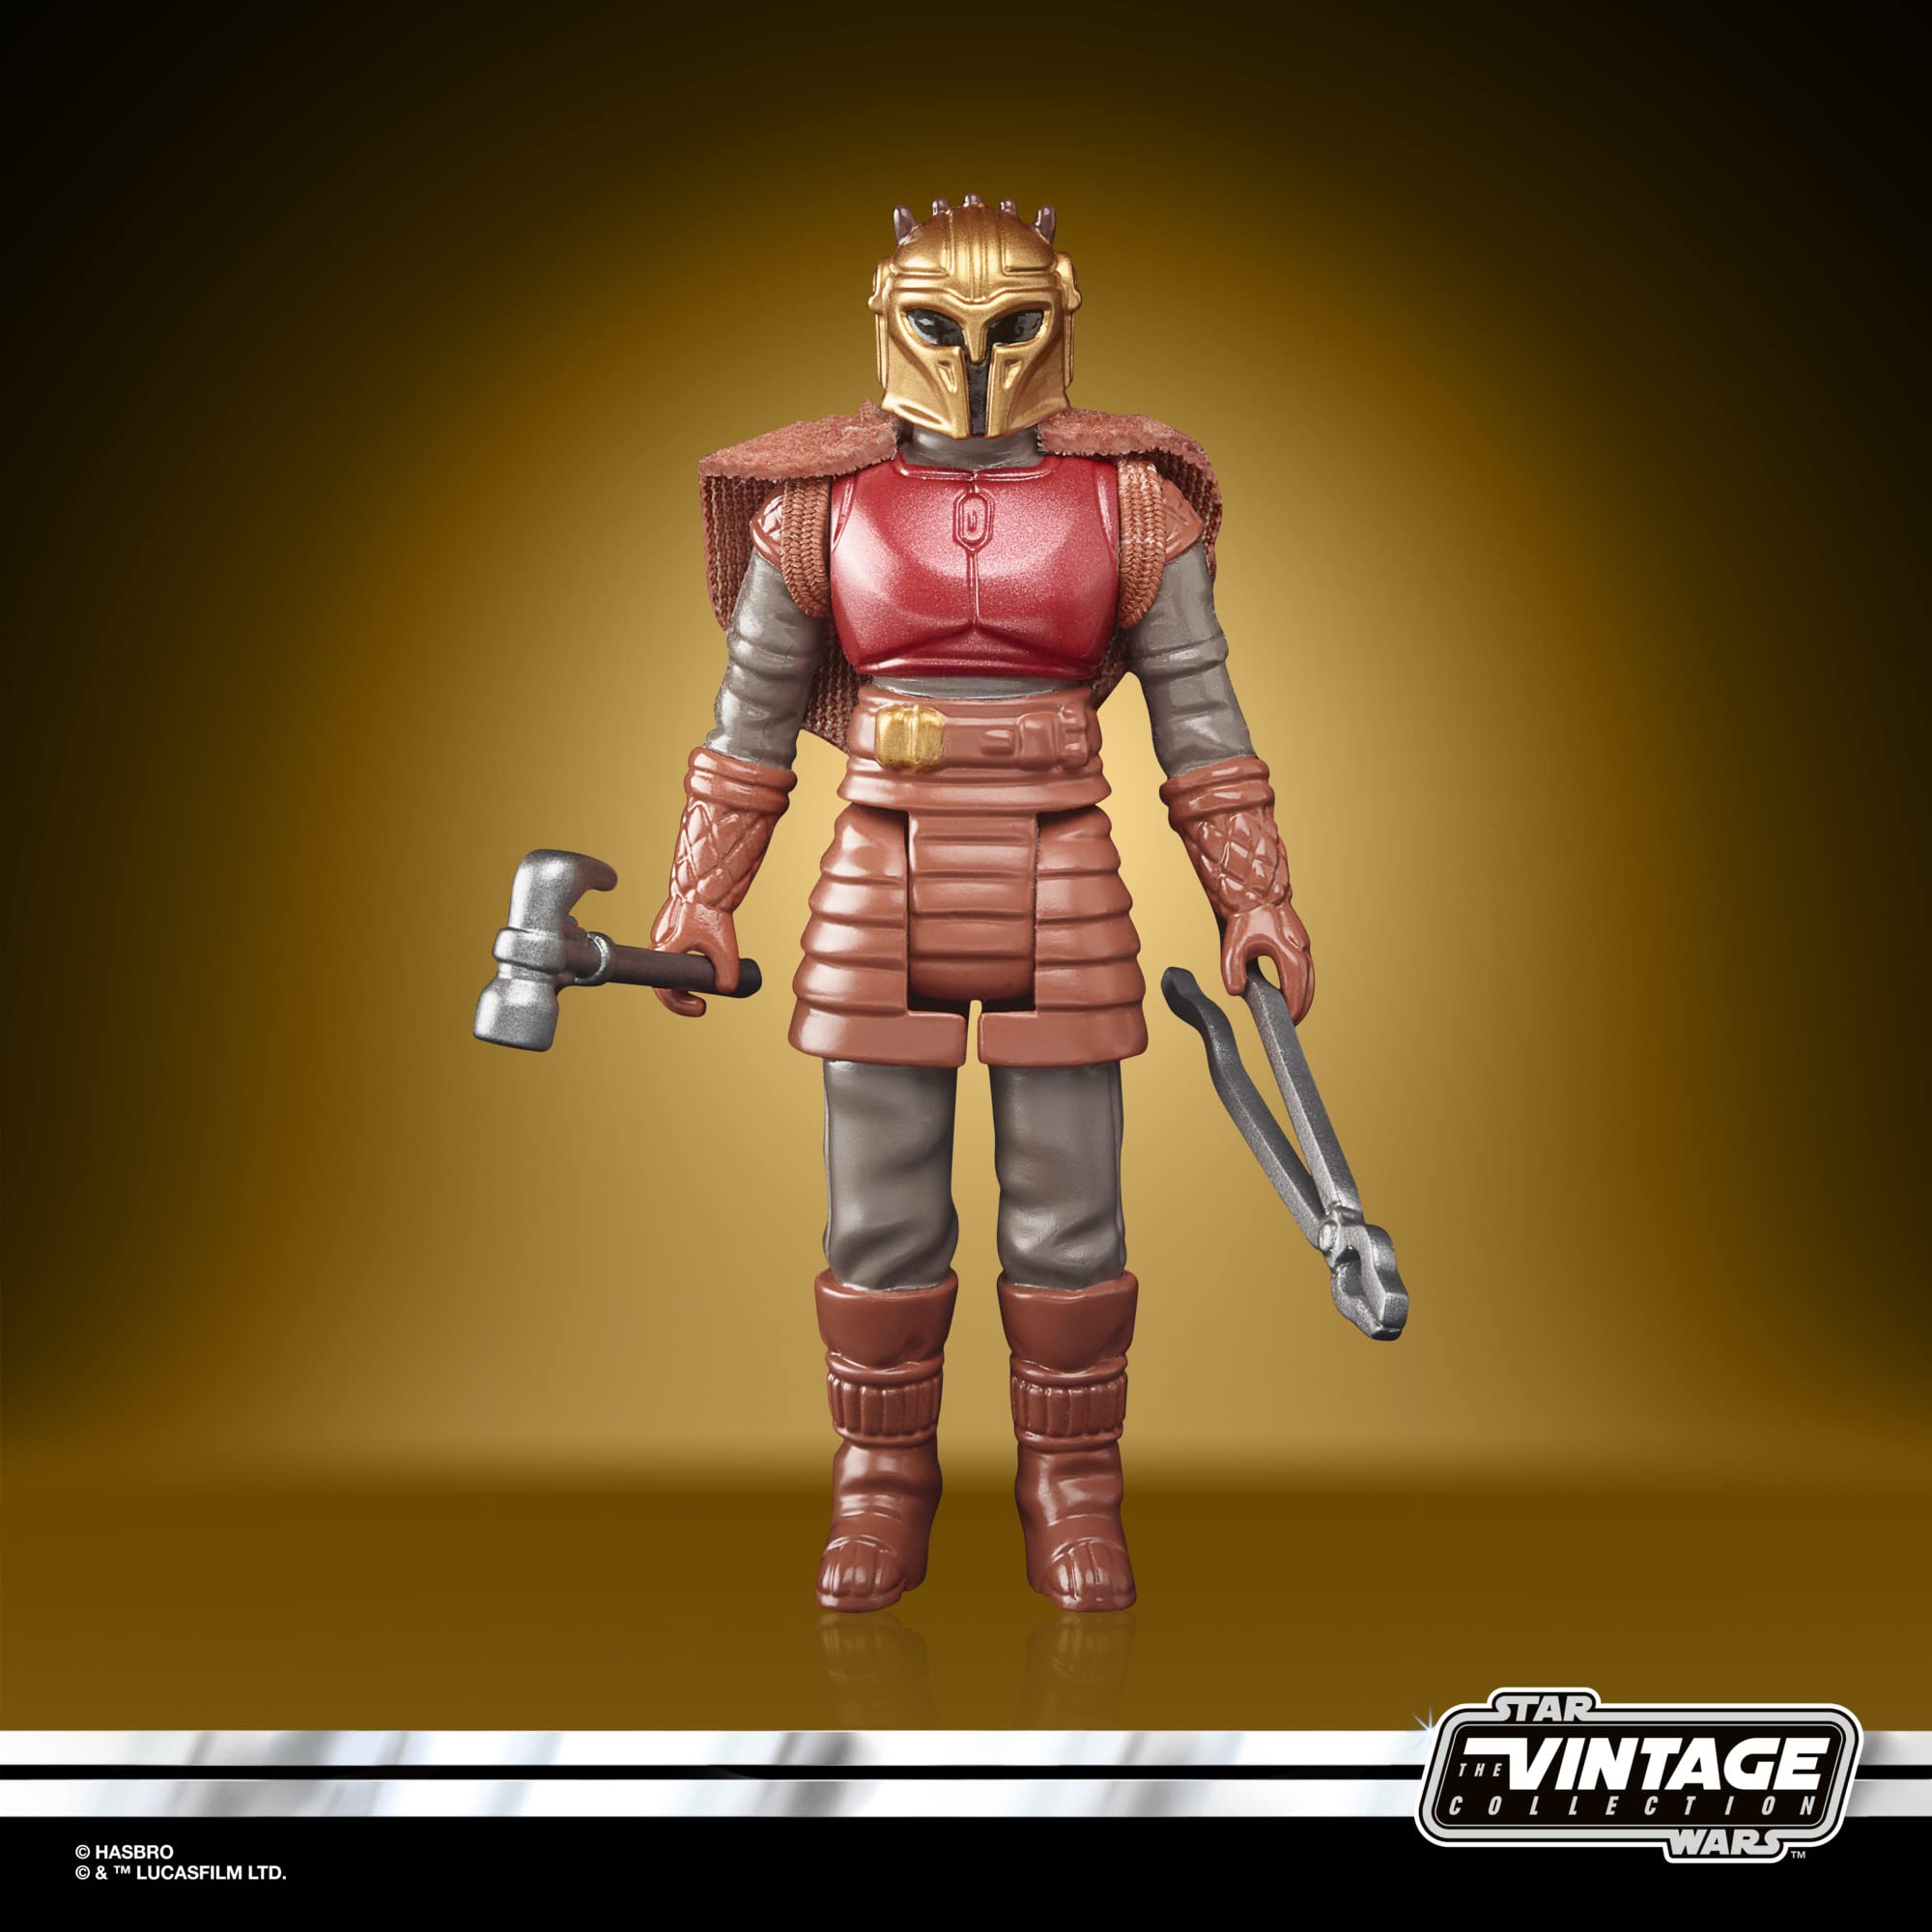 Star Wars Retro Collection The Armorer Toy 3.75-Inch-Scale The Mandalorian Collectible Action Figure, Toys for Kids Ages 4 and Up